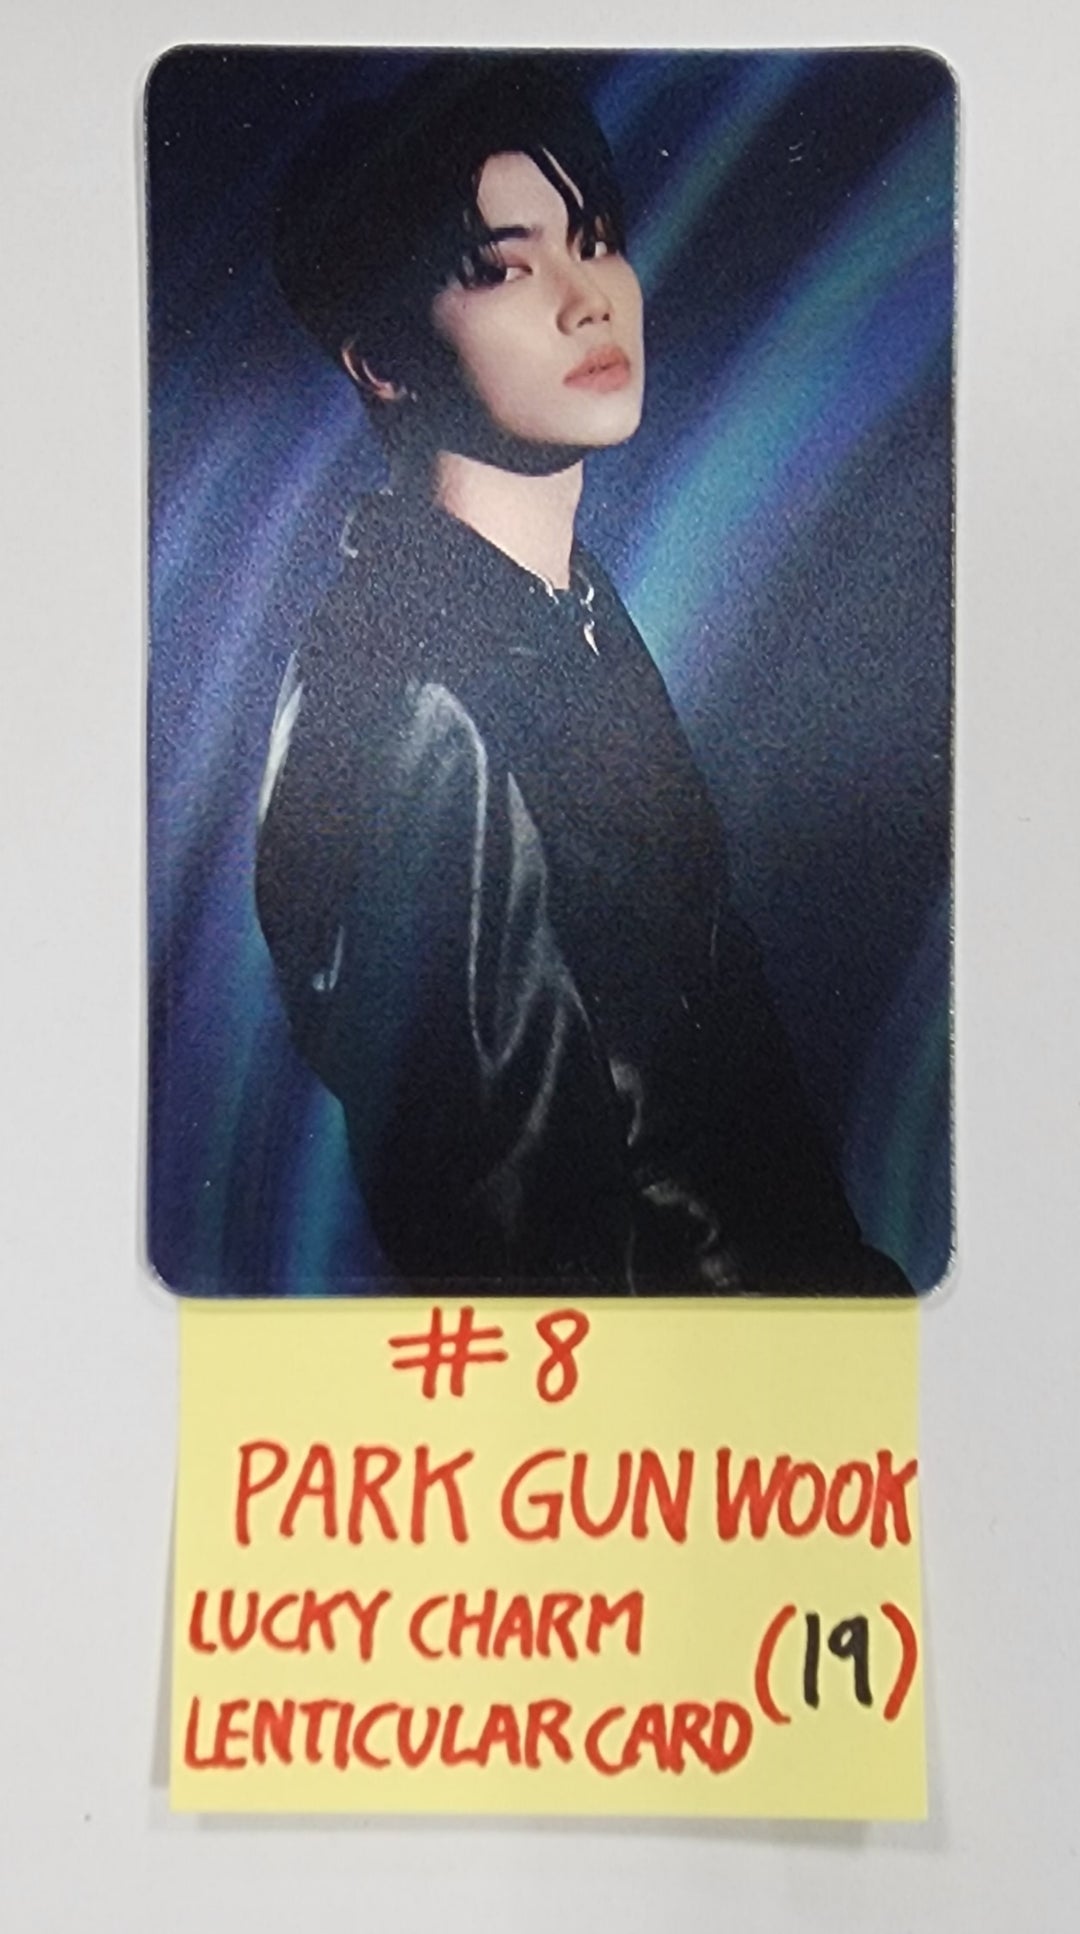 ZEROBASEONE (ZB1) "MELTING POINT" - Official Lucky Charm Lenticular Photocard [23.11.07]